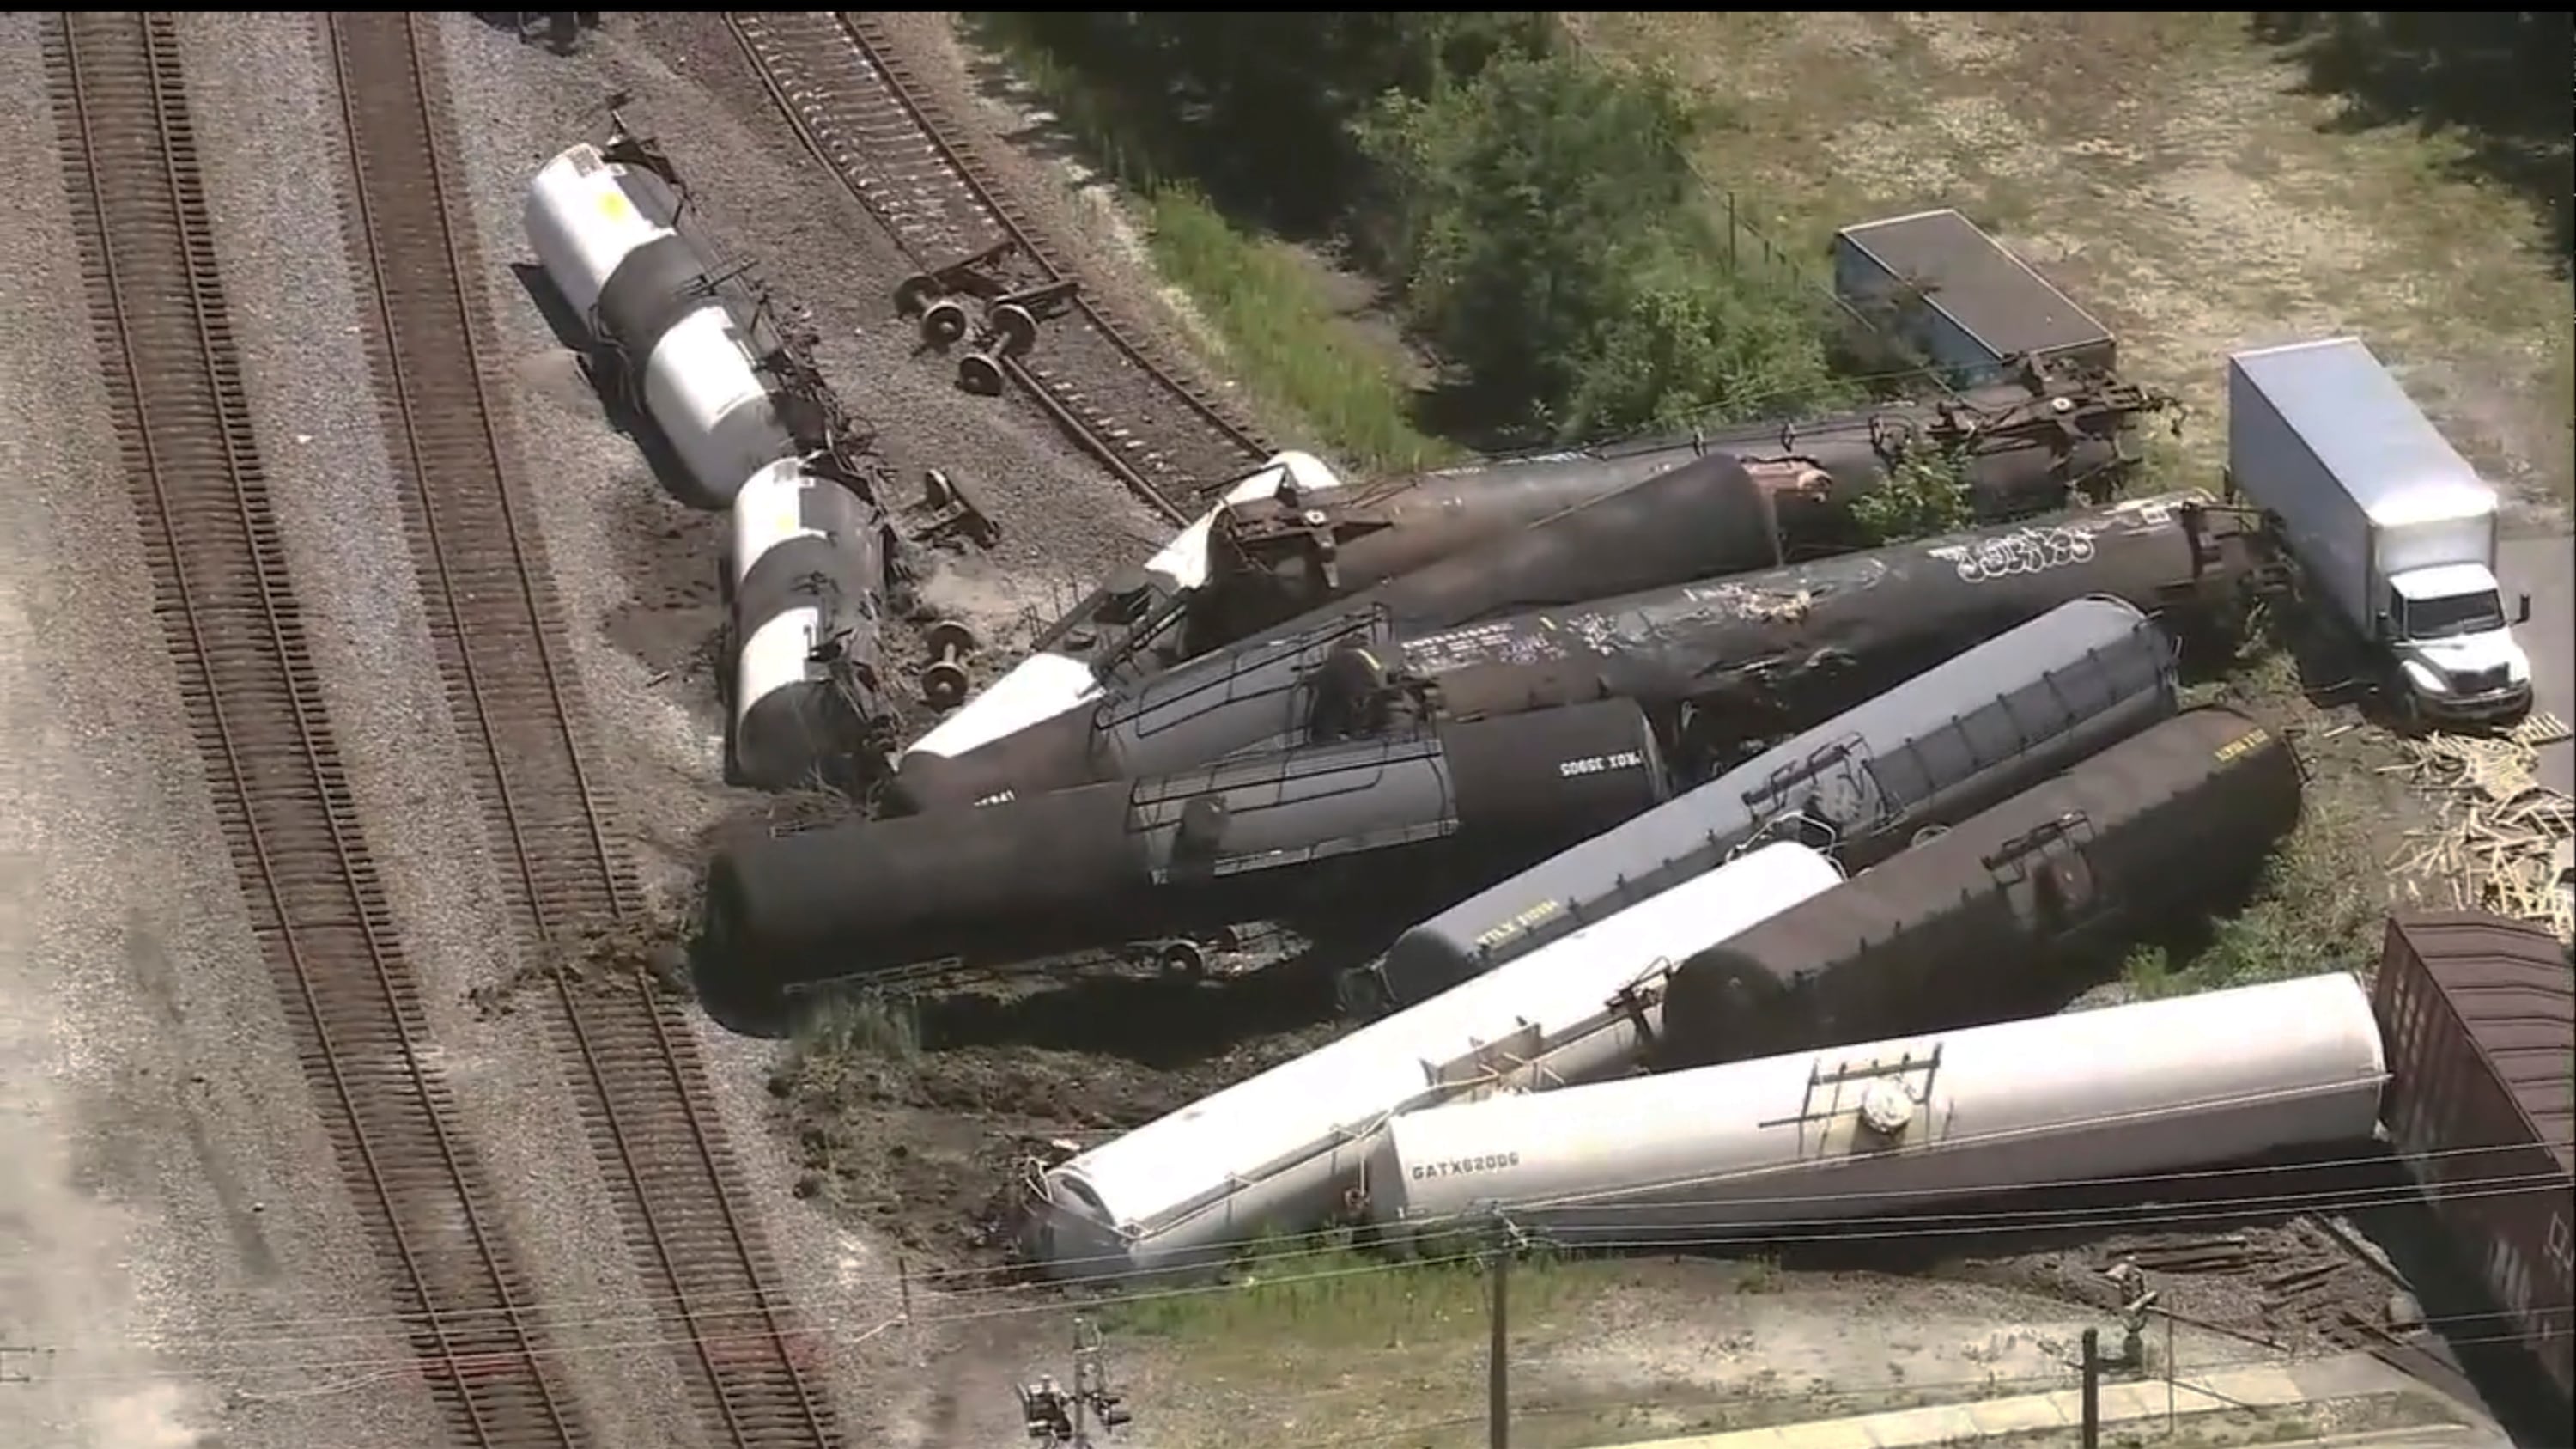 Train compartments piled up after a derailment in Chicago on Thursday (WLS via AP)